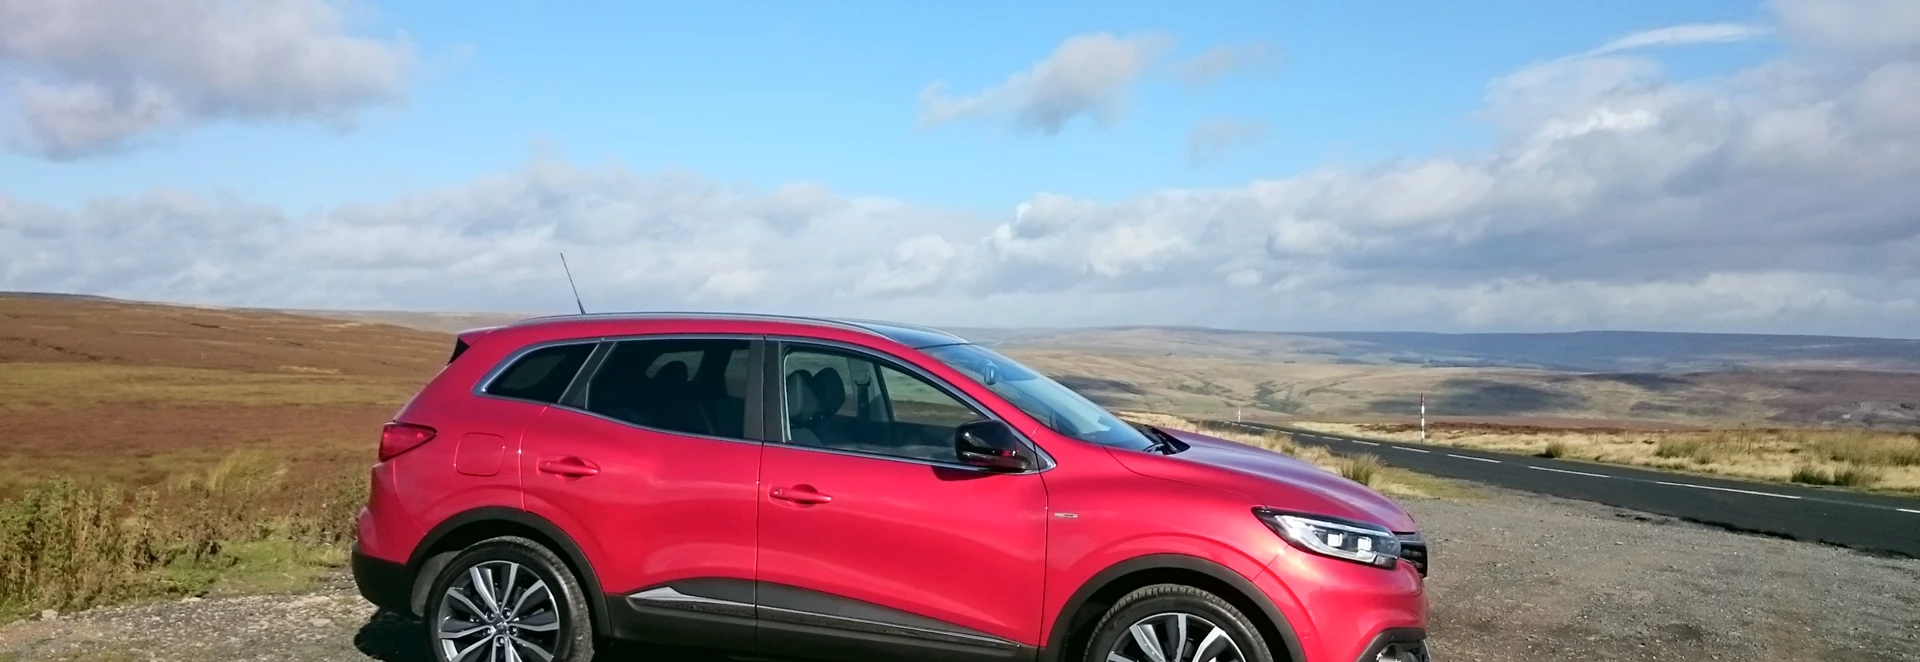 Renault Kadjar review  large boot and modern styling make it a